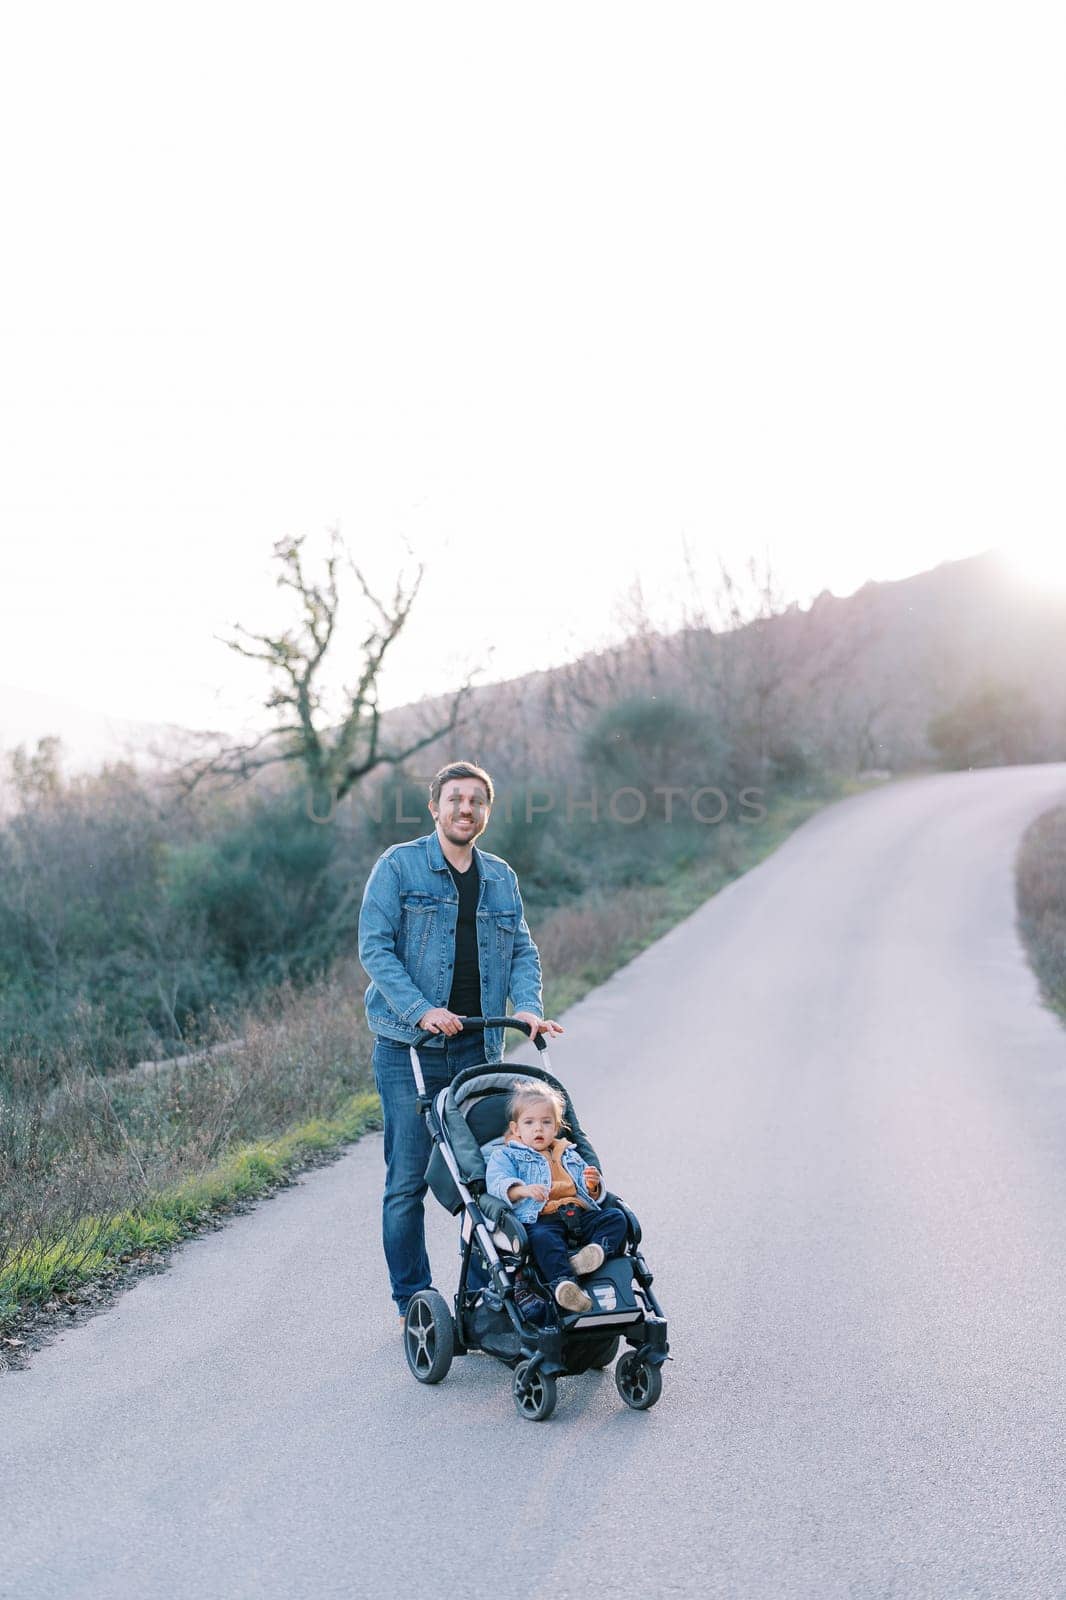 Smiling dad with a little girl in a stroller stands on an asphalt road in the mountains by Nadtochiy